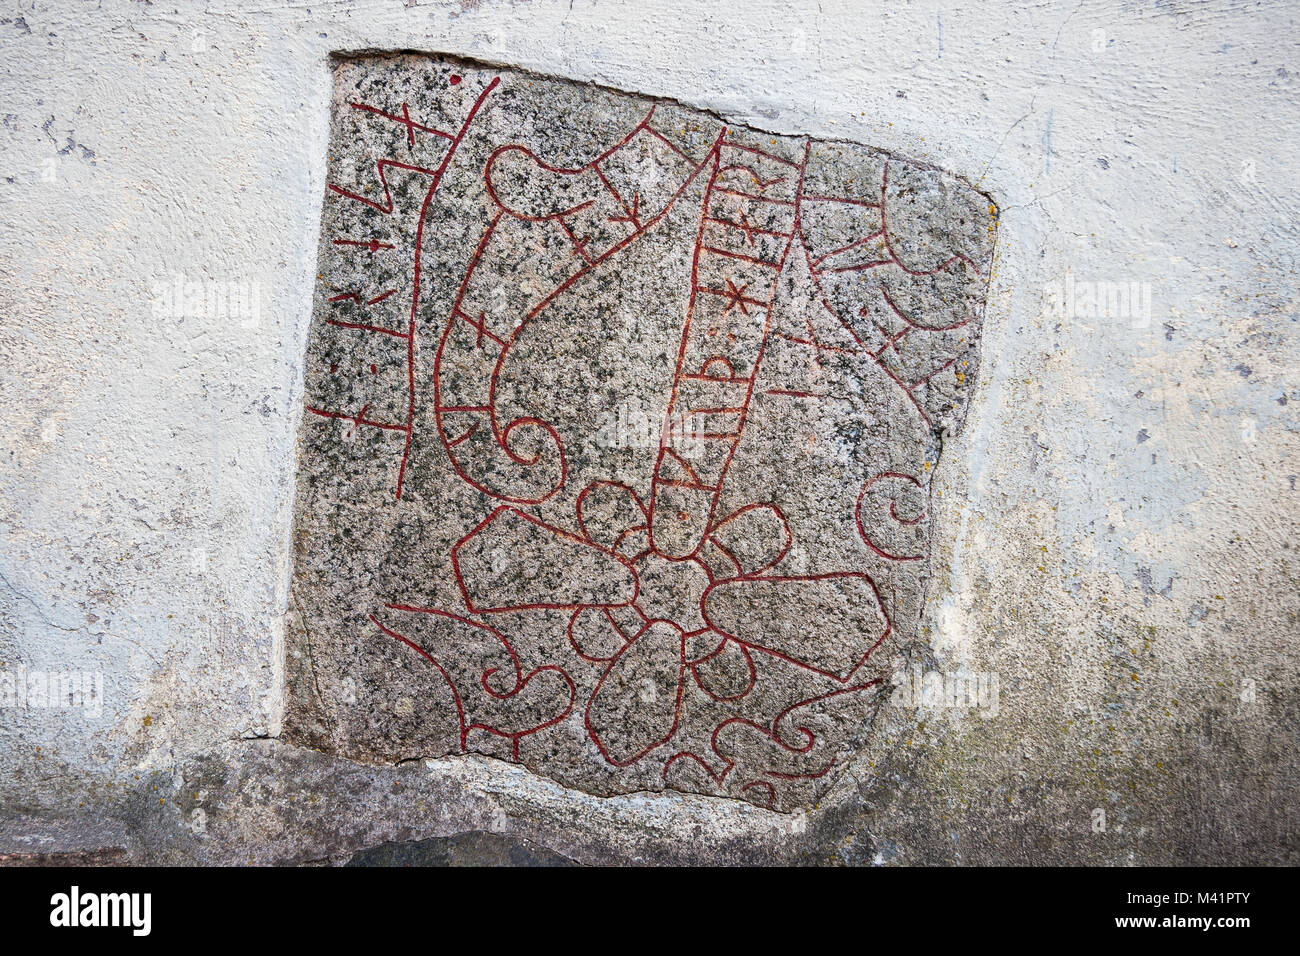 Runestone built into the wall. Sigtuna, Sweden, Europe Stock Photo